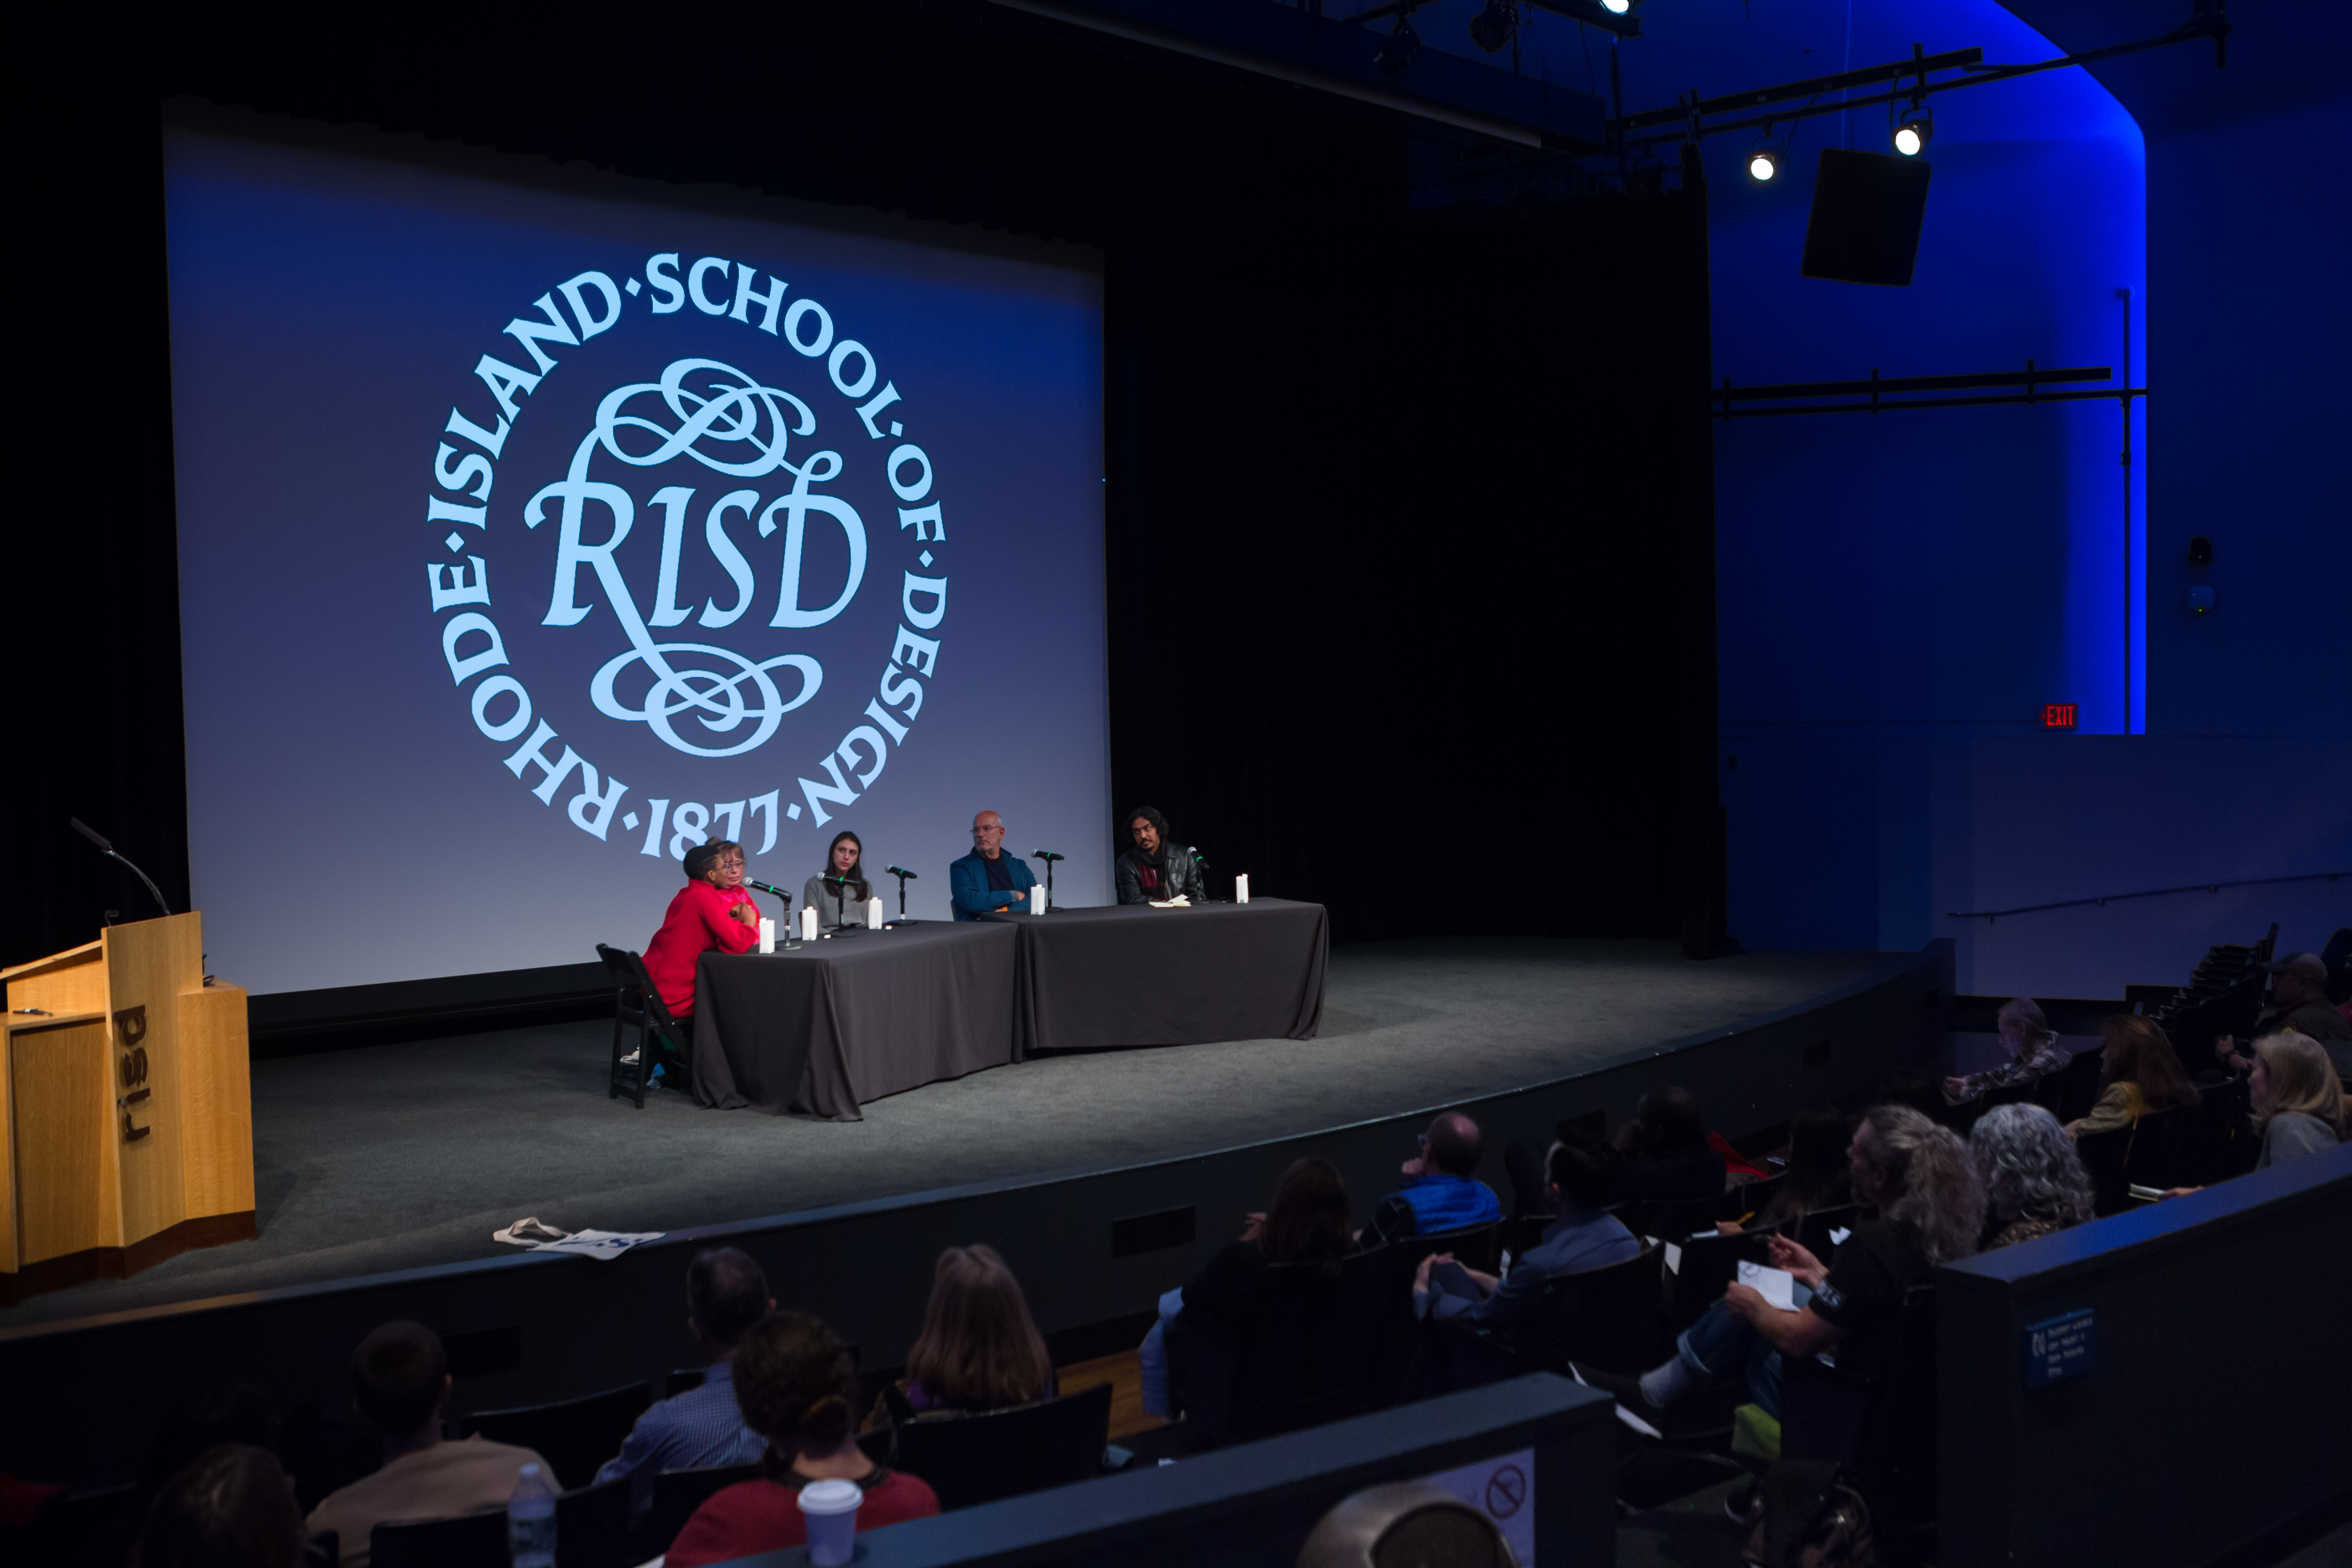 /Five%20panelists%20sit%20at%20a%20table%20onstage%20in%20an%20auditorium.%20The%20RISD%20seal%20is%20projected%20behind%20them.